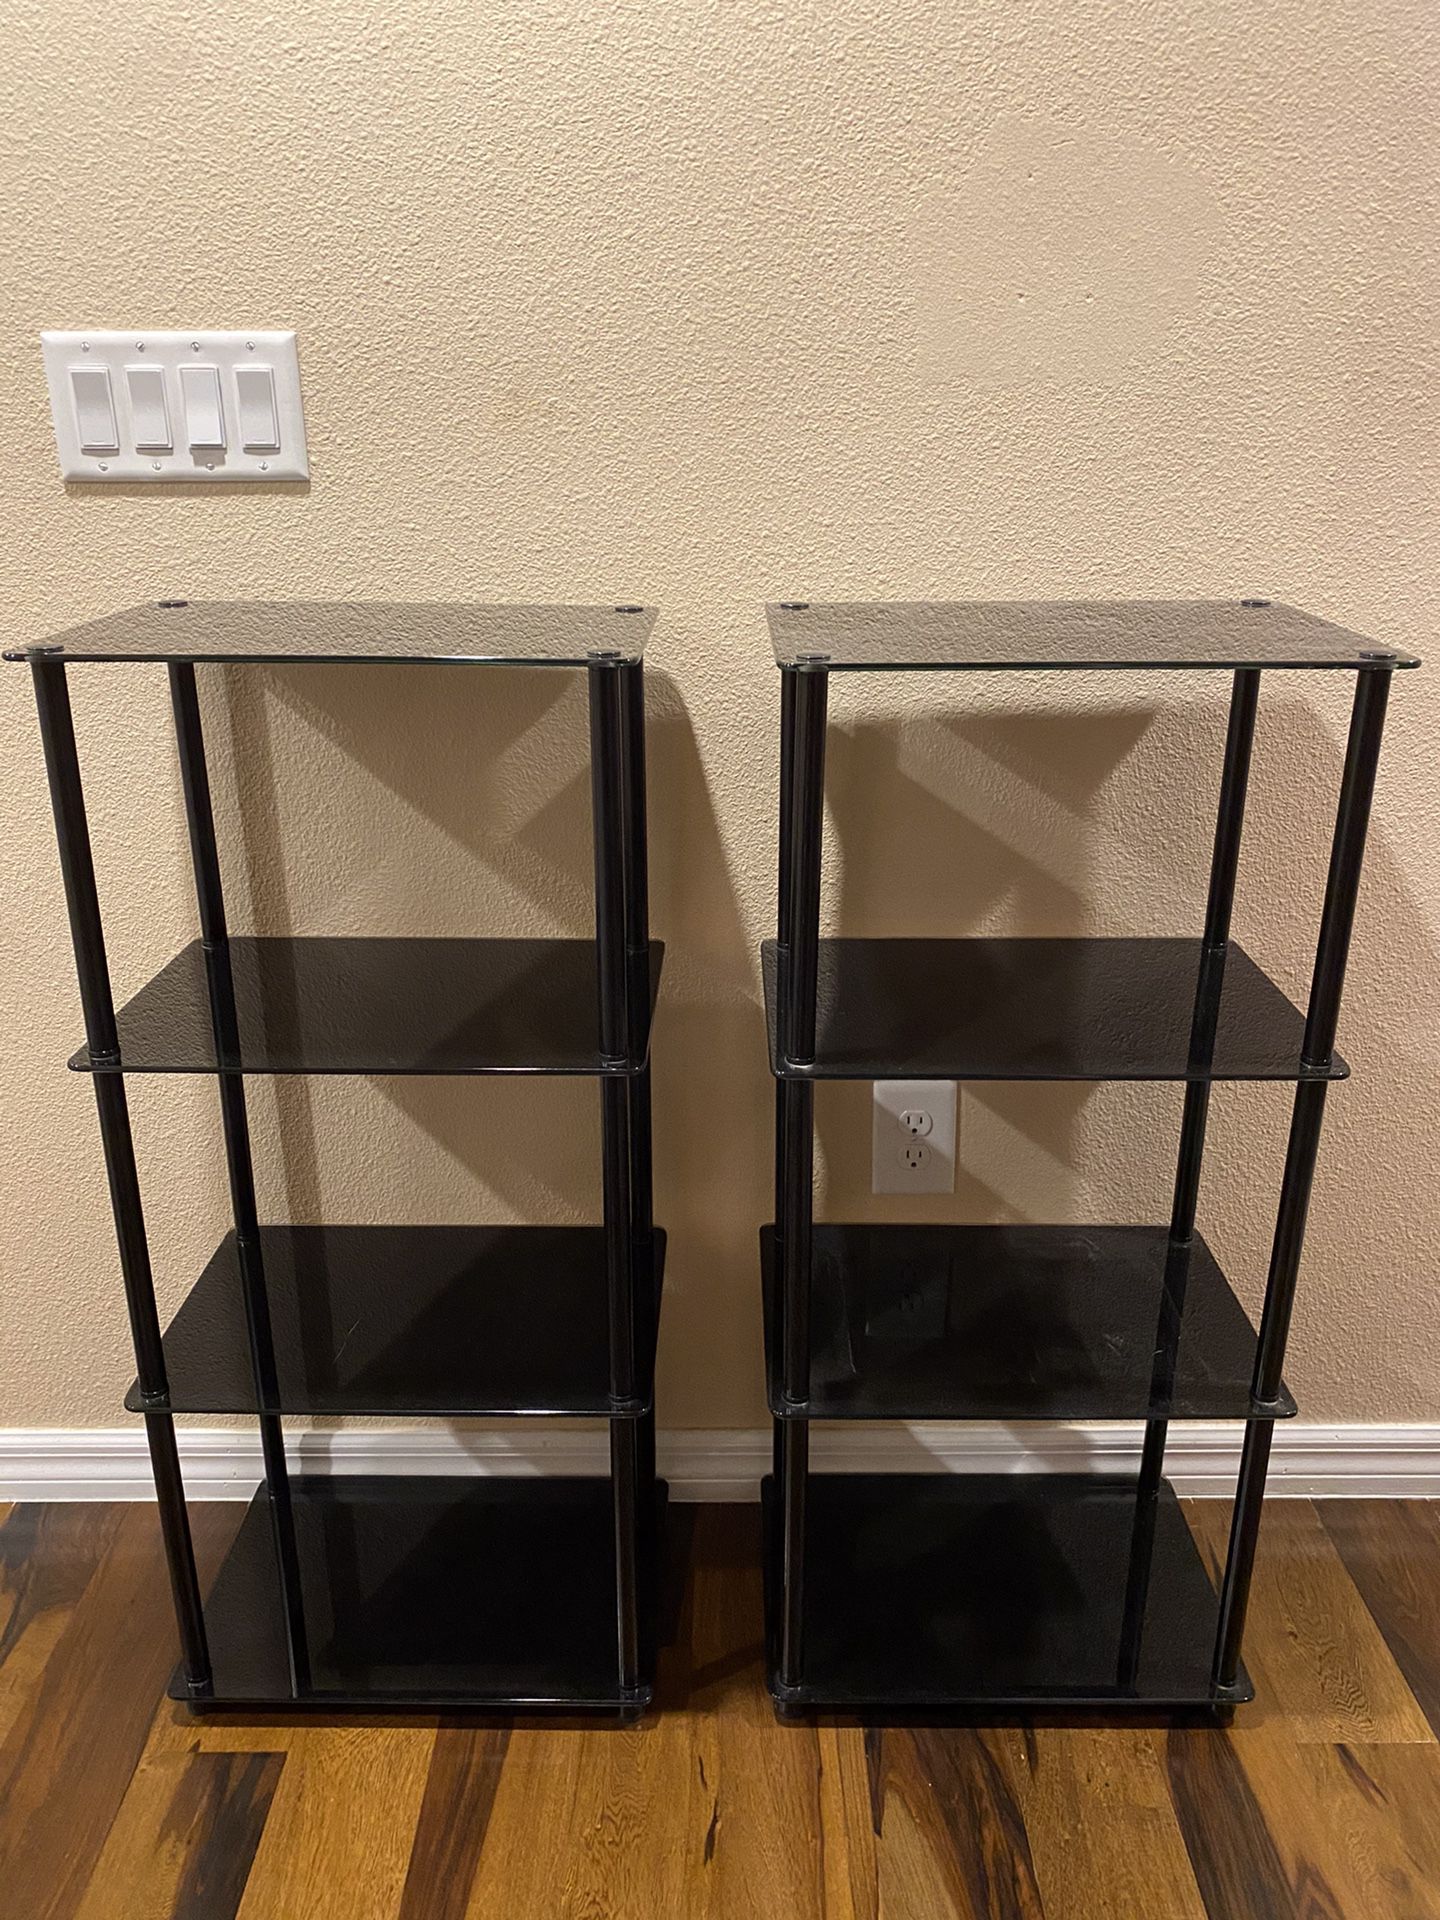 Glass Display Stands